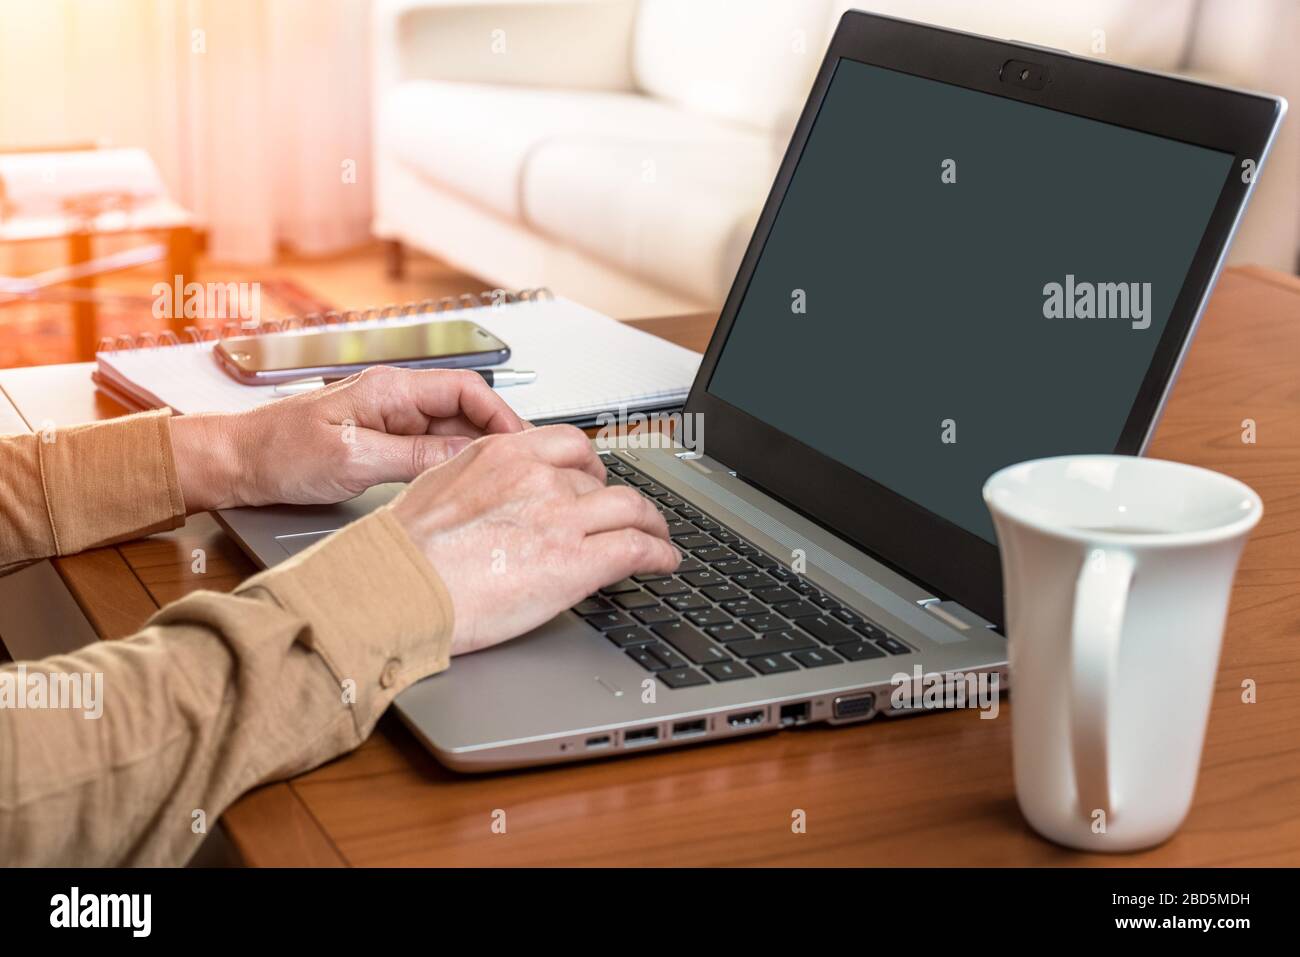 Businesswoman working from home using laptop and smartphone during the coronavirus pandemic Stock Photo